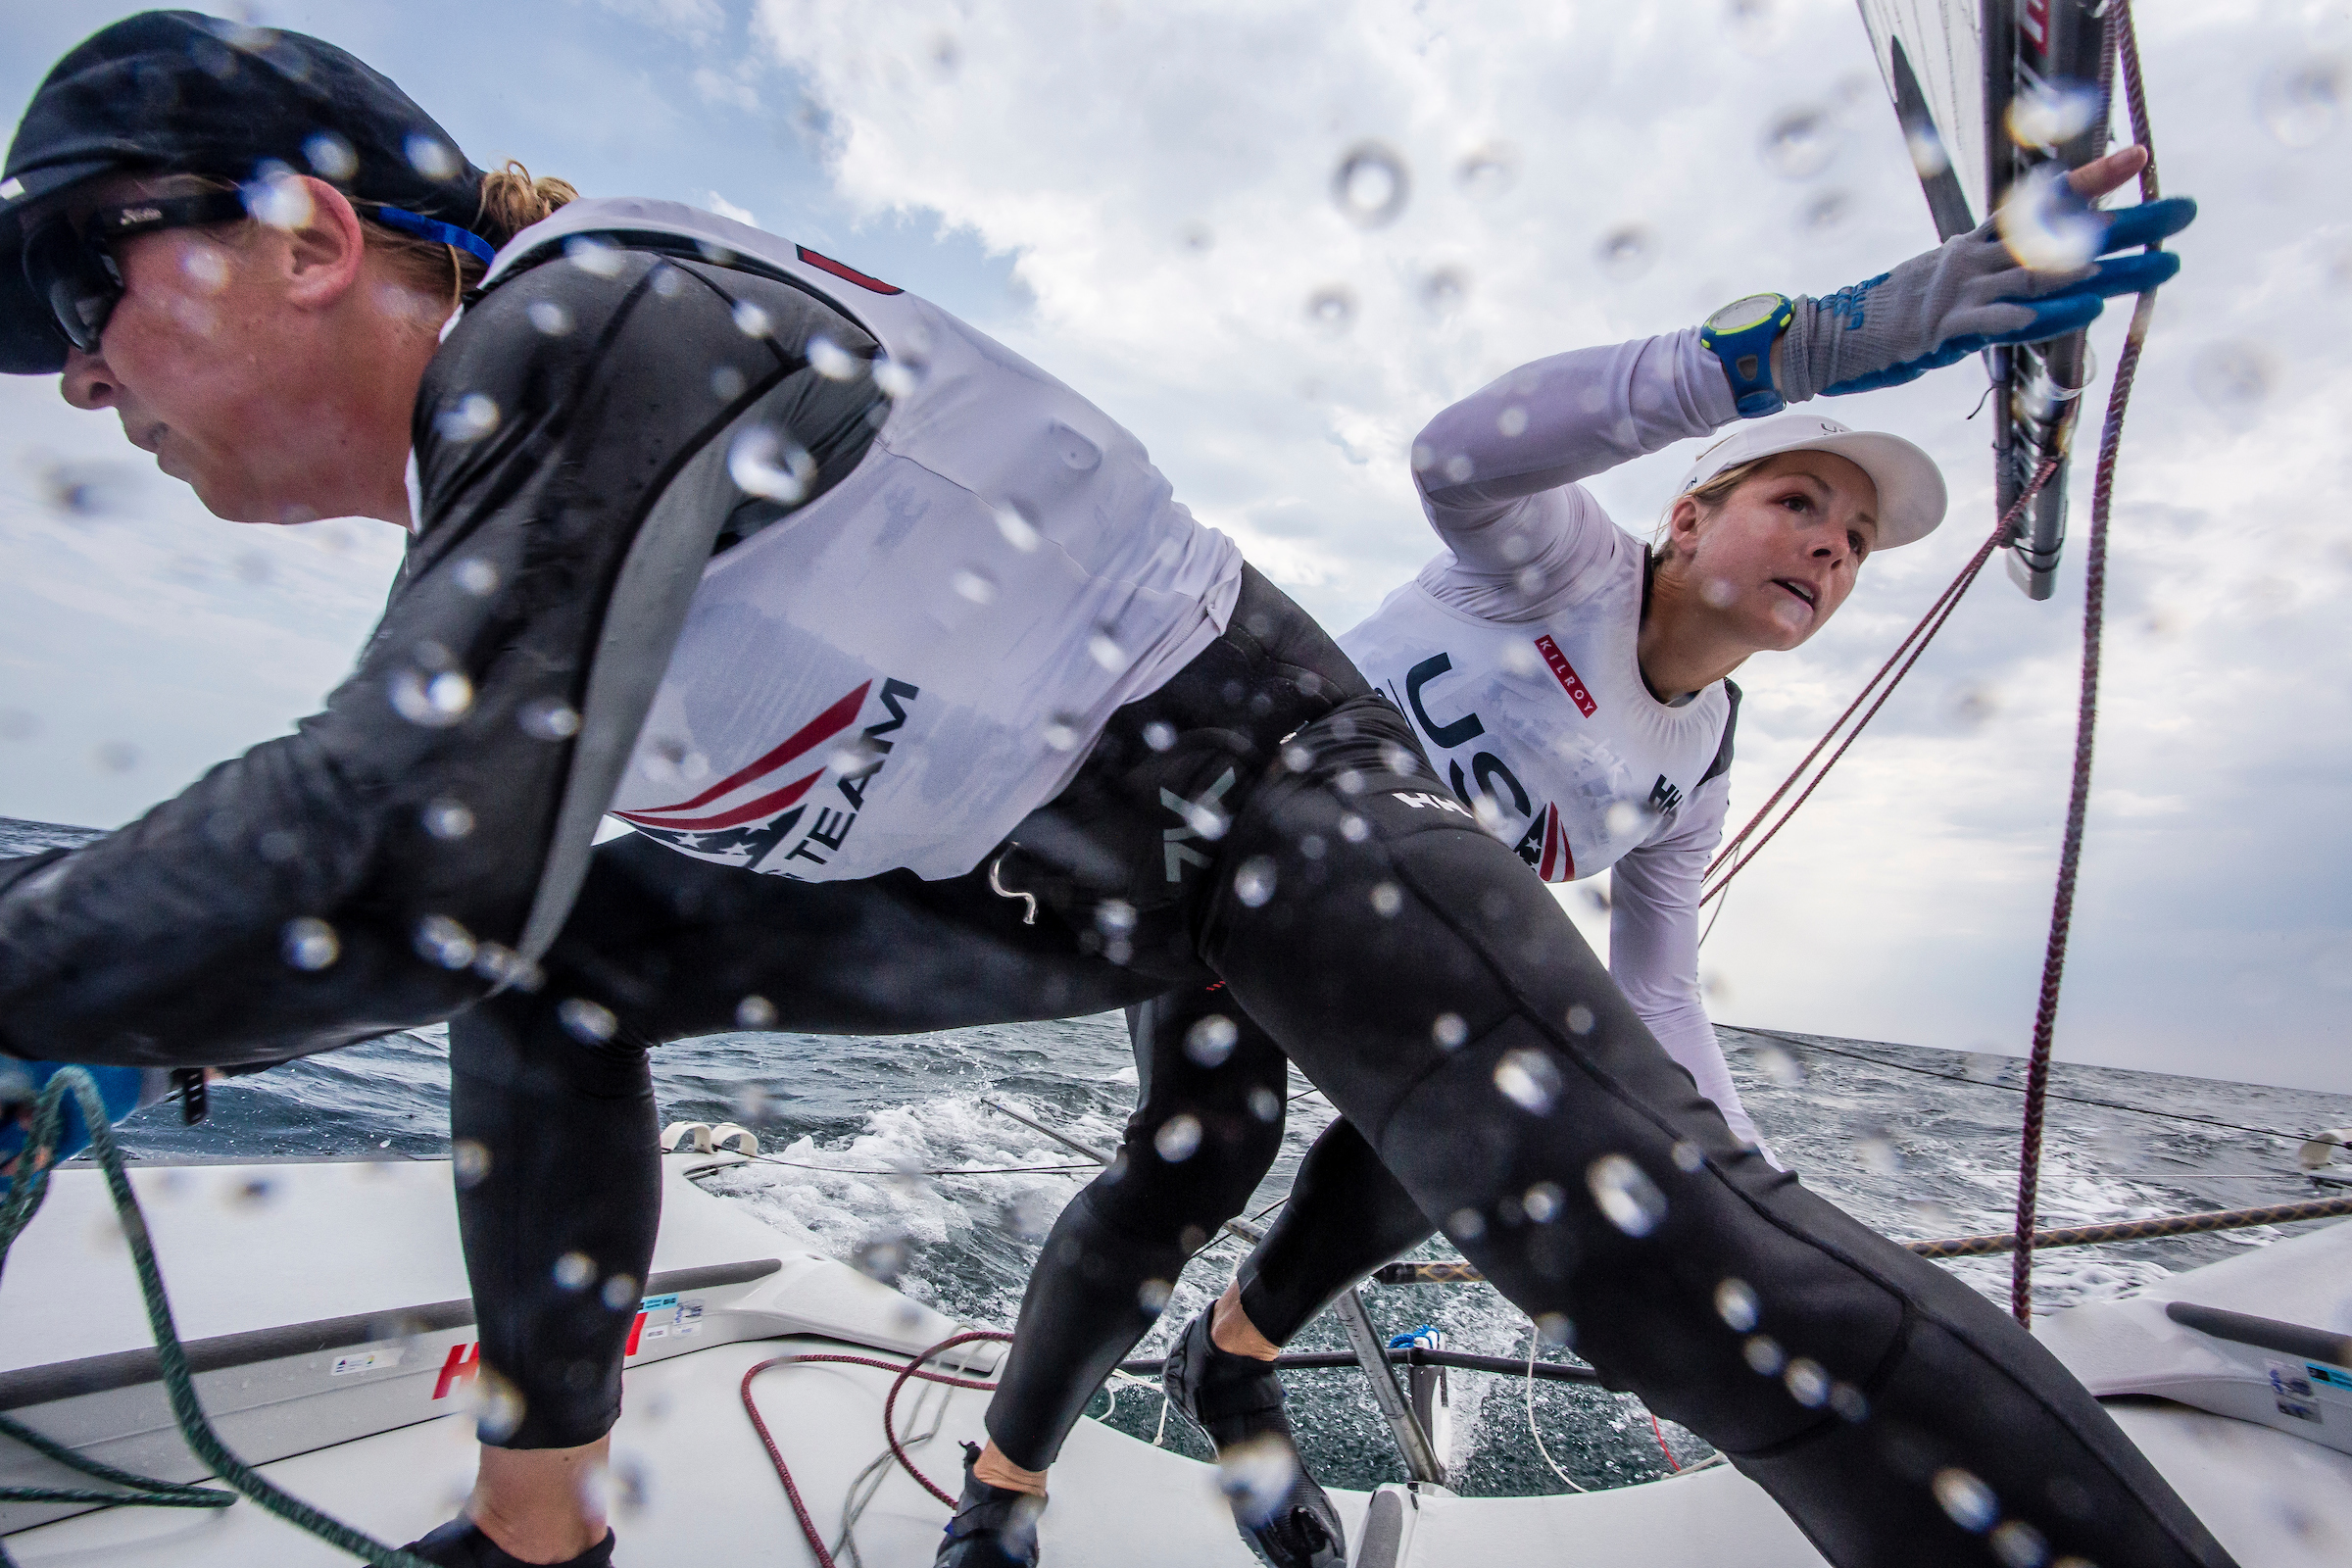 Maggie Shea and Stephanie Roble of US SAILING Team shooting before Aarhus World Champiochips on July 31, 2018. (@Sailing Energy / US Sailing)